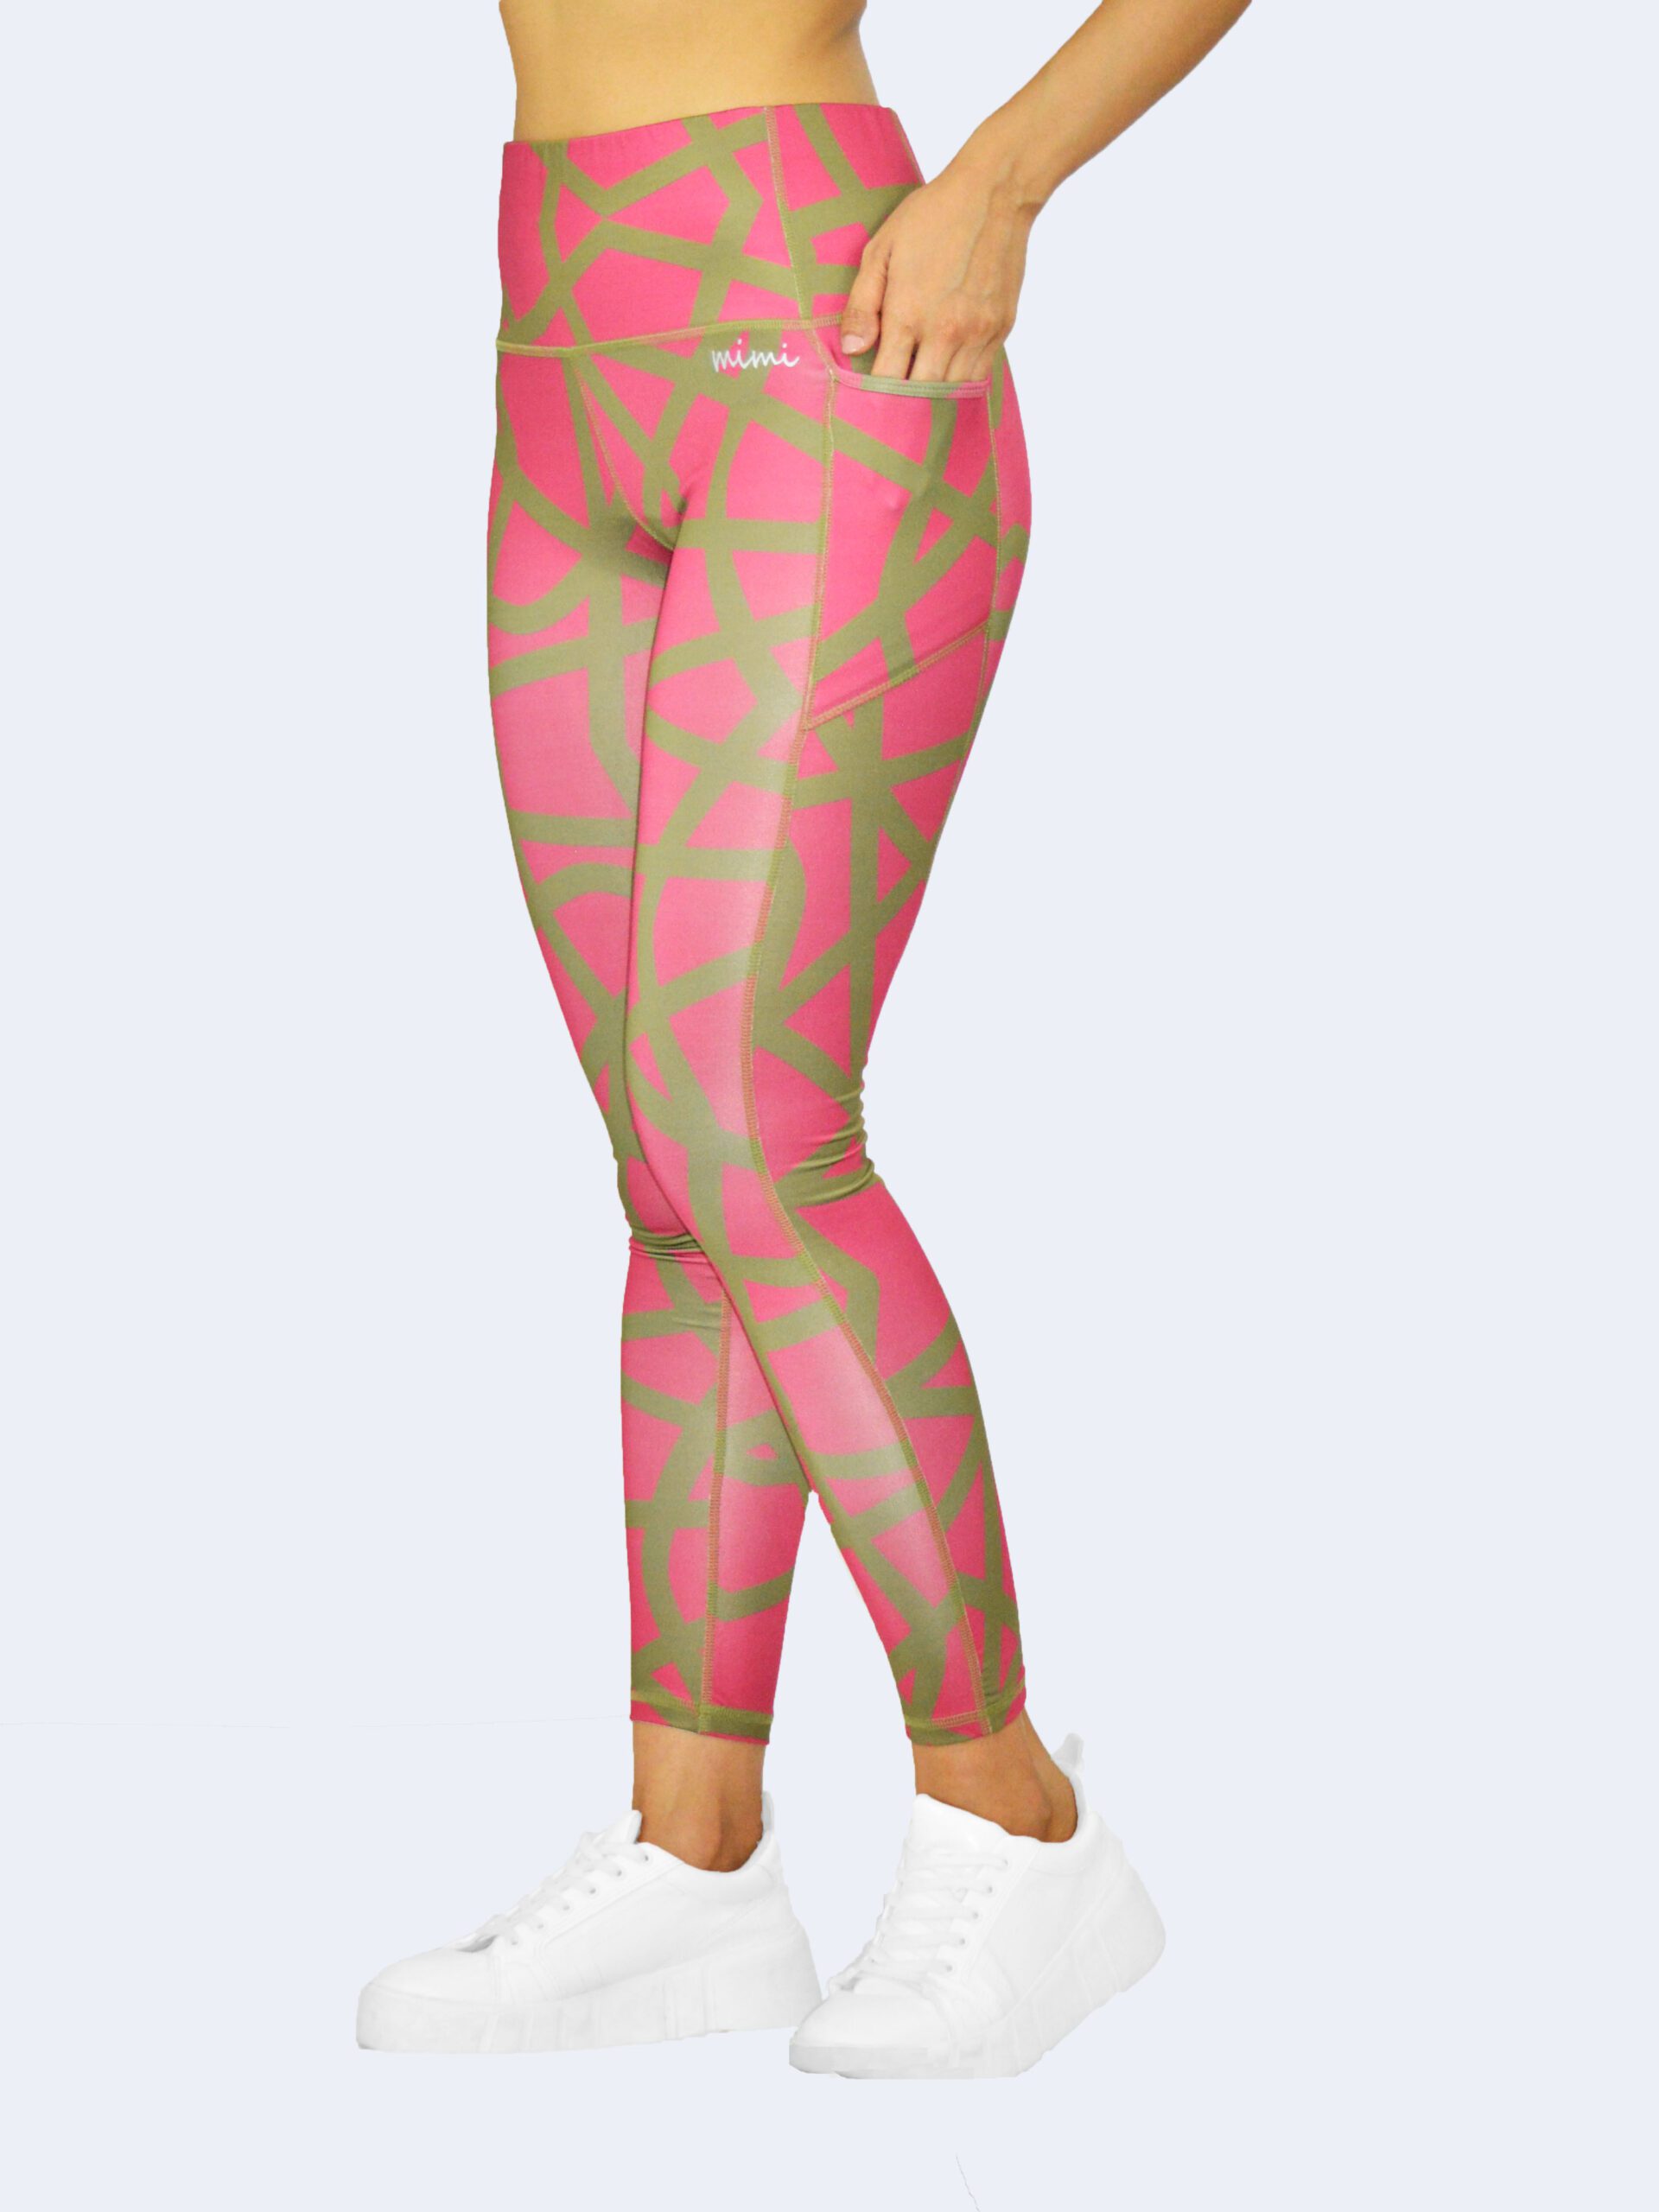 Nexstep Printed Women Multicolor Tights - Buy Nexstep Printed Women  Multicolor Tights Online at Best Prices in India